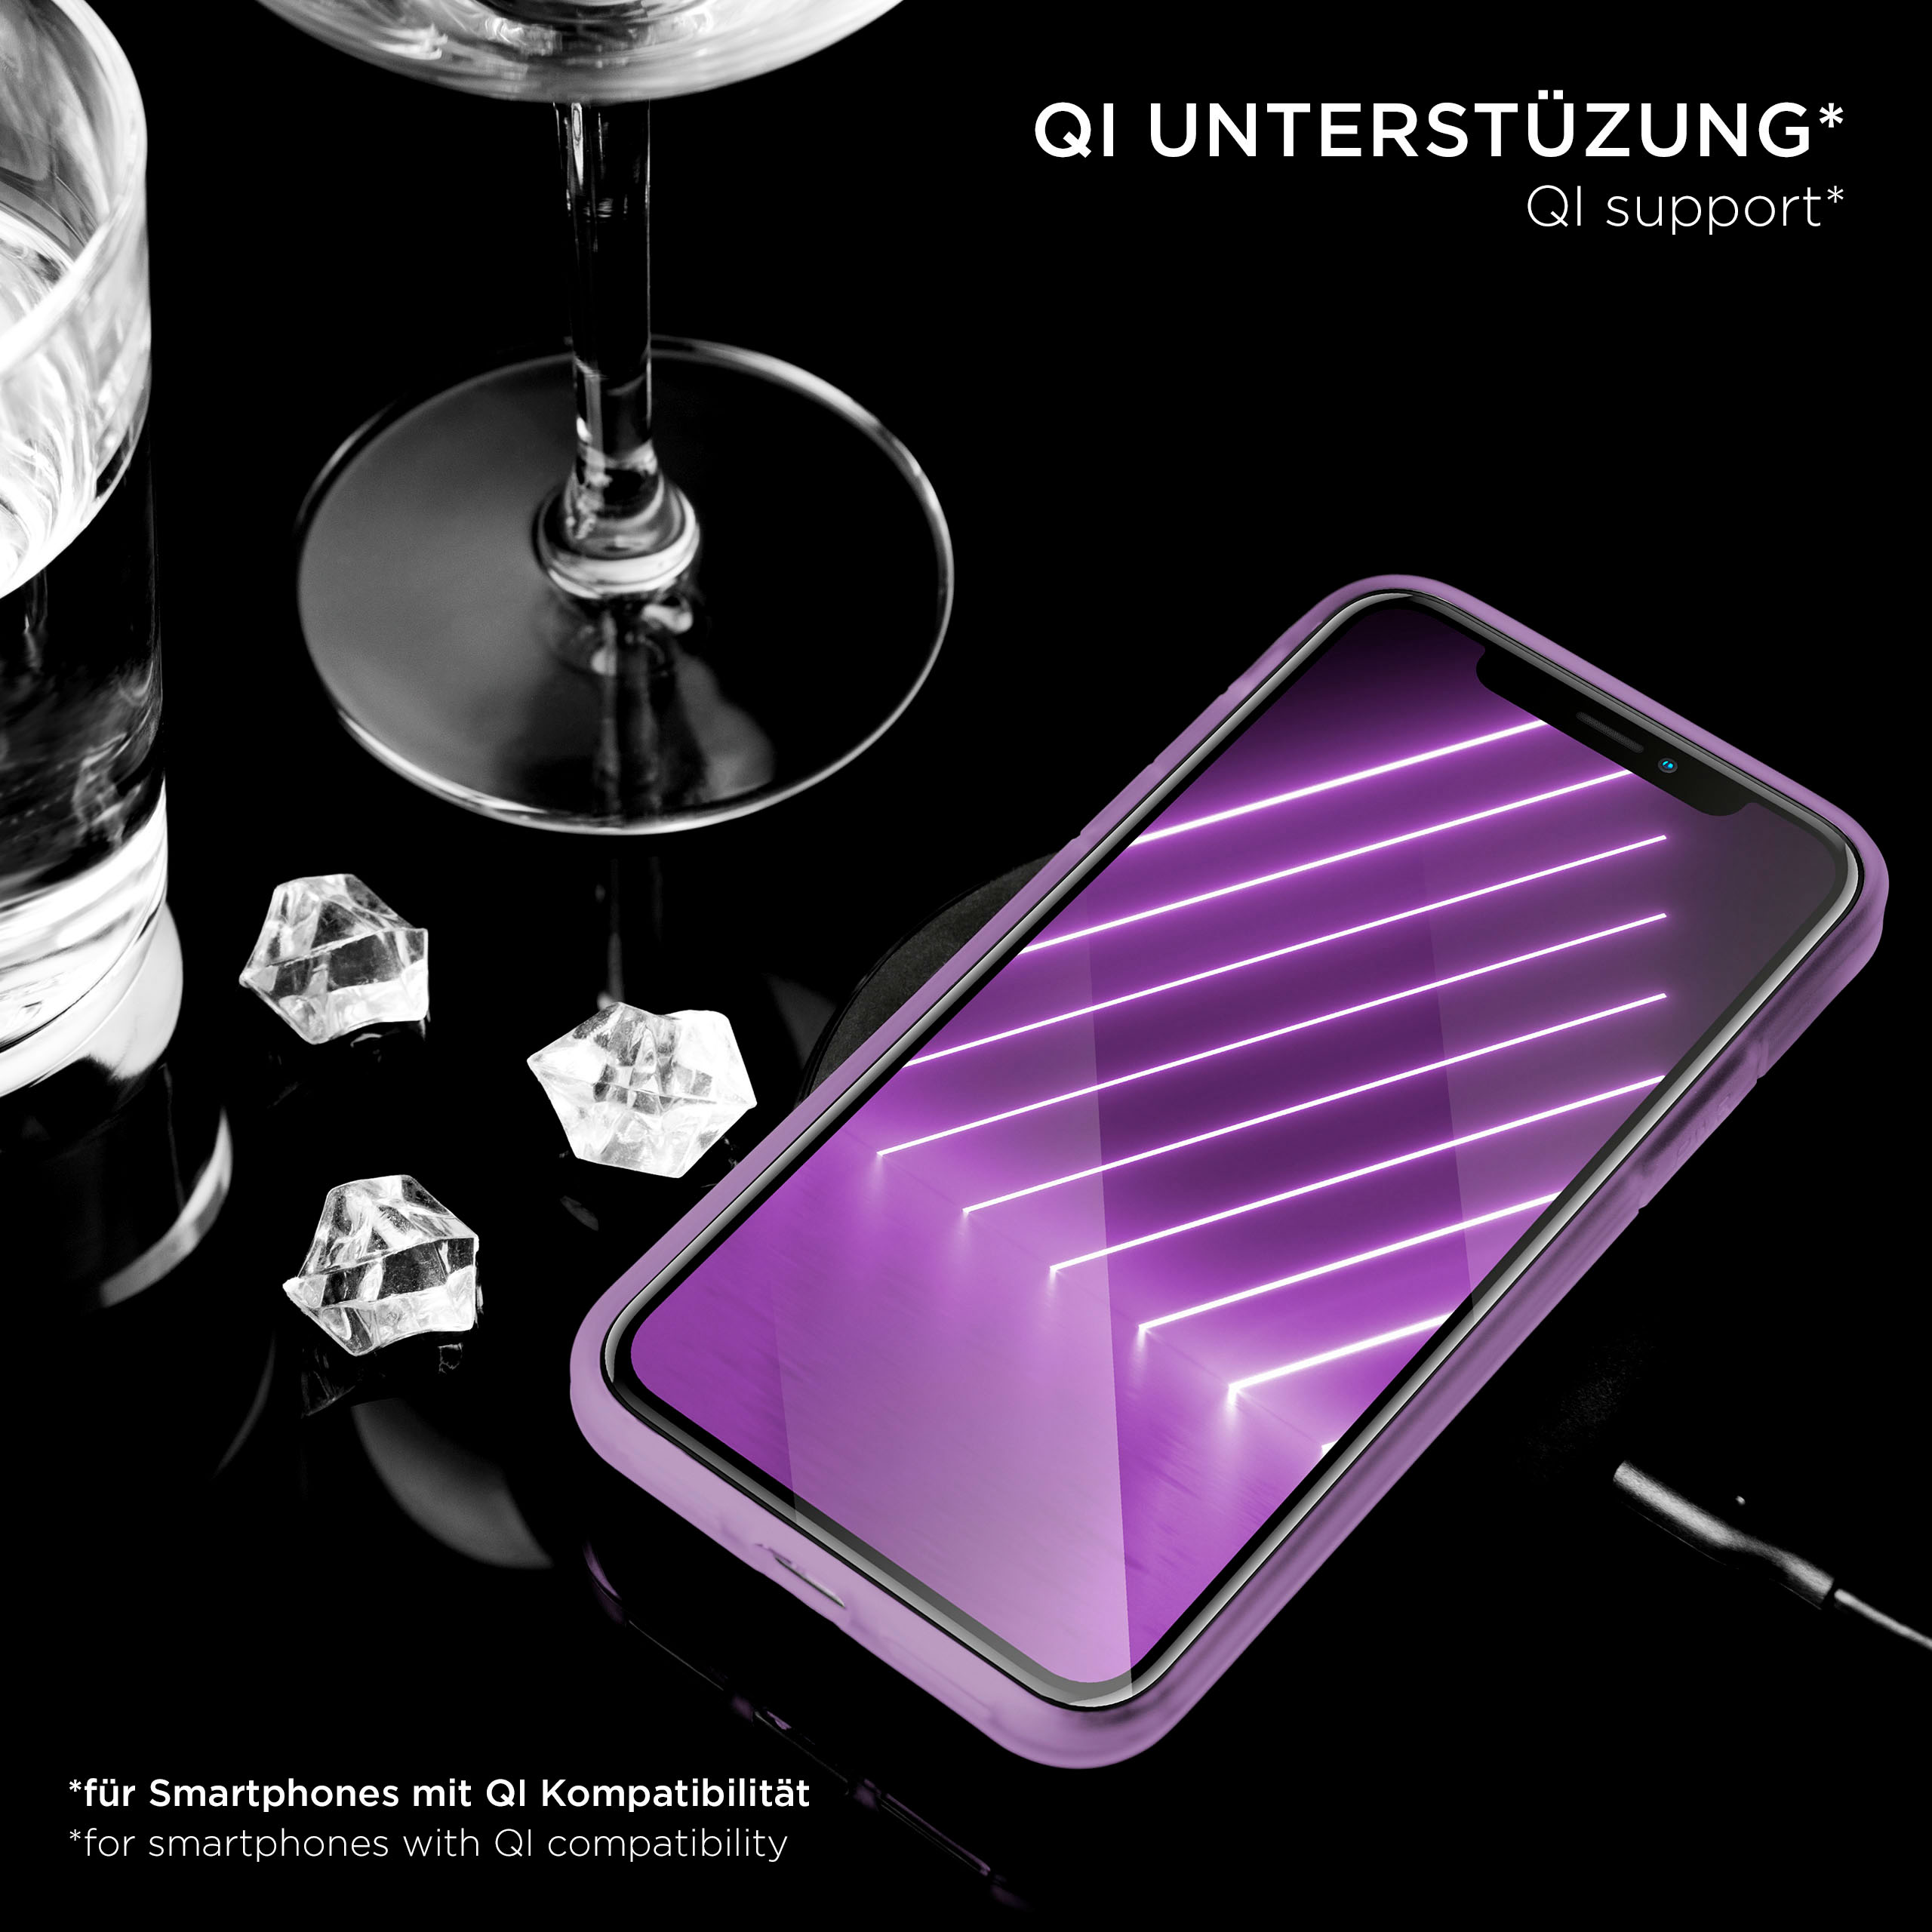 ONEFLOW Clear Case, Backcover, Apple, iPhone 8 Plus, 7 iPhone Violescent / Plus